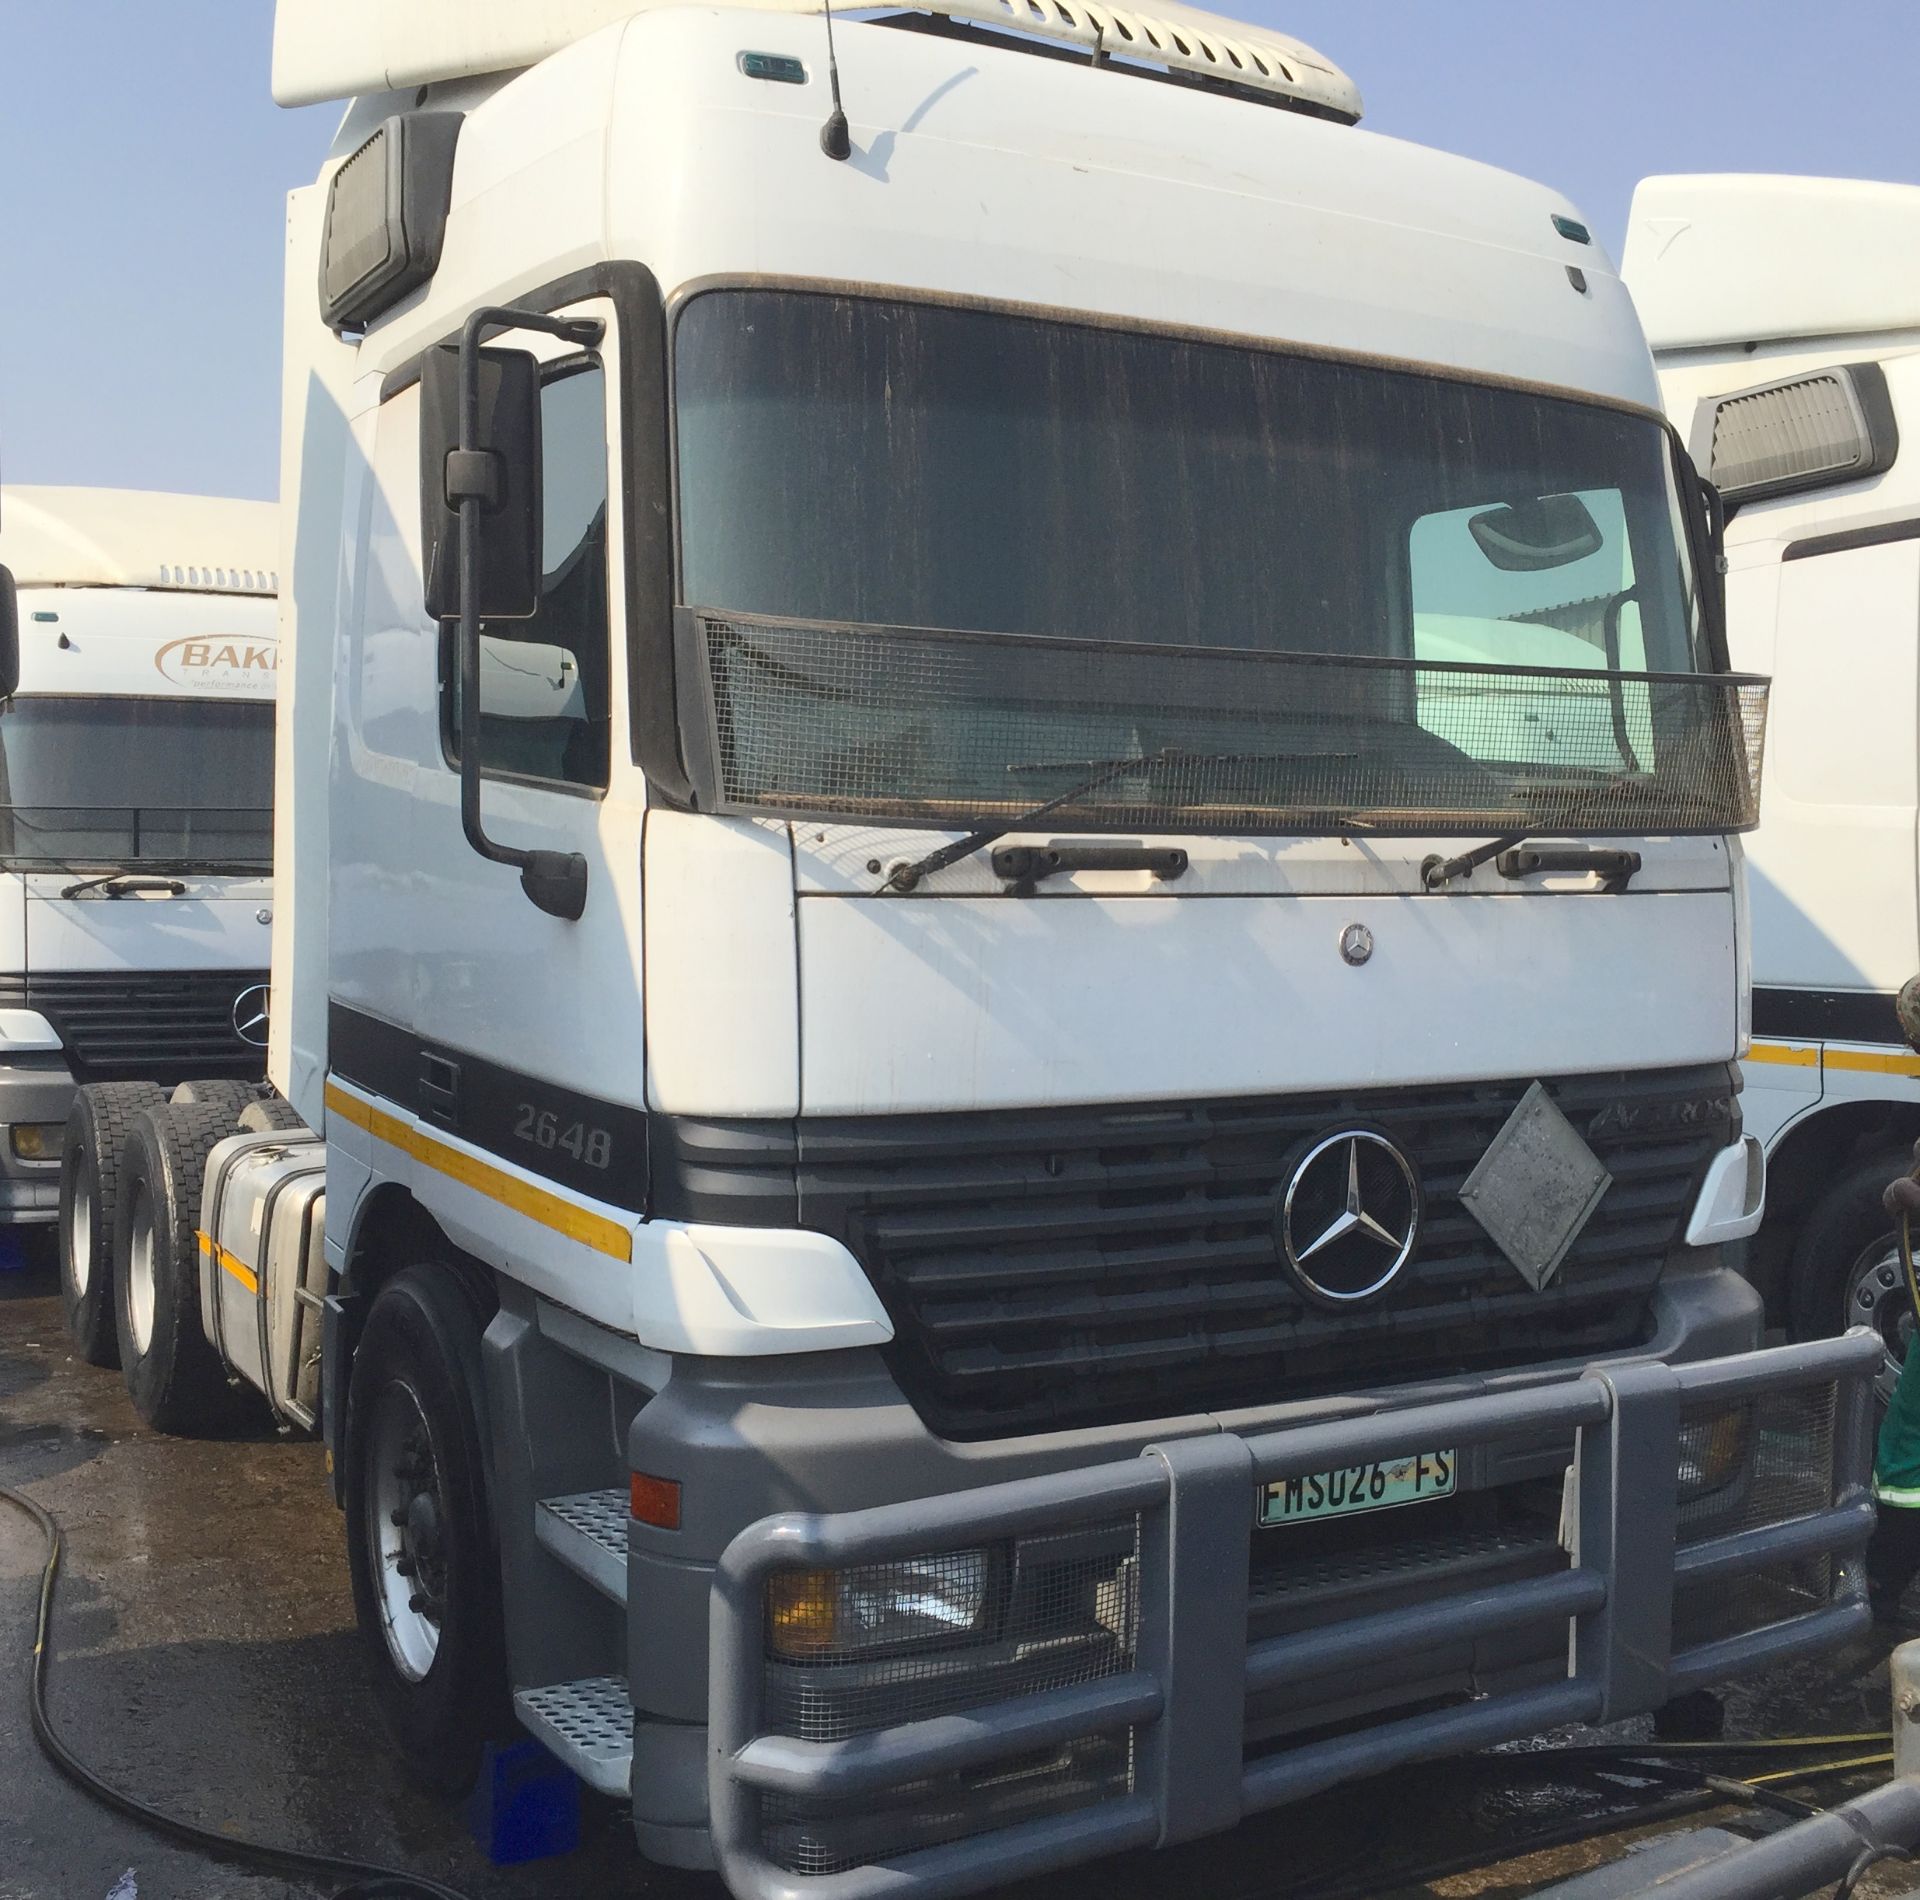 2003 M/BENZ ACTROS 2648 6X4 T/T - REG NO: FMS026FS - (ITEM TO BE SOLD SUBJECT TO CONFIRMATION)